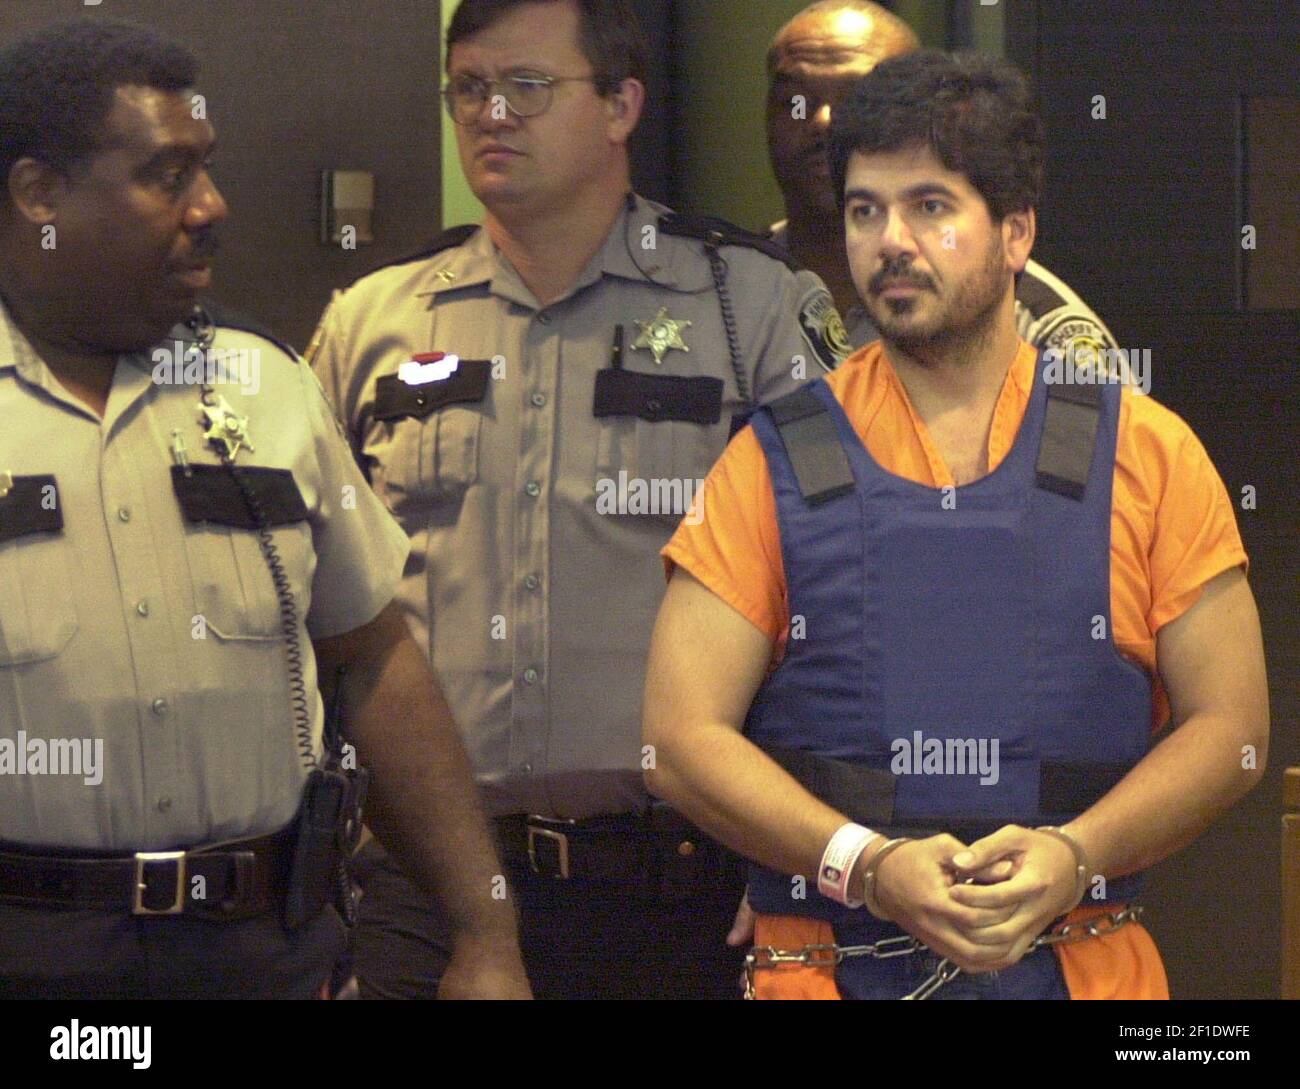 Oct 26, 2000; Augusta, GA, USA; Reinaldo J. Rivera (right), who is charged with the murders of four women in Georgia and South Carolina, is led by Richmond County Sheriff's deputies into the courtroom of Judge H. Scott Allen in Augusta, Ga., on Thursday, October 26, 2000, to face extradition to South Carolina. Mandatory Credit: Jonathan Ernst/The Augusta Chronicle via USA TODAY NETWORK/Sipa USA Stock Photo